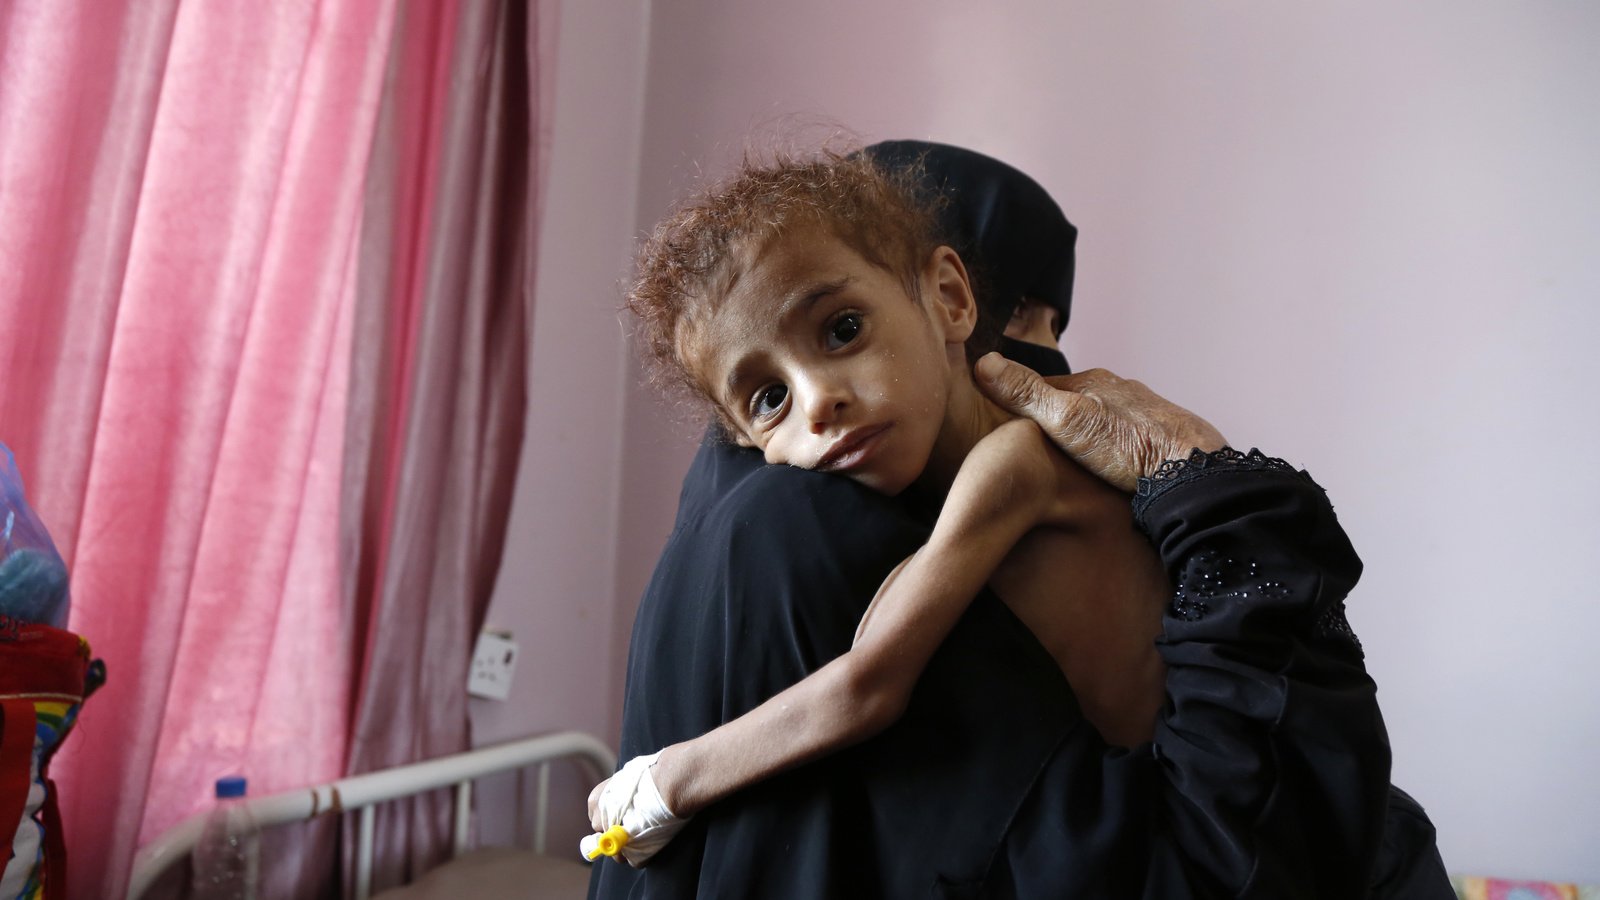 Anti-War Groups Urge US Congress to ‘Prevent Human Catastrophe’ in Yemen by Ending Support for Saudi War